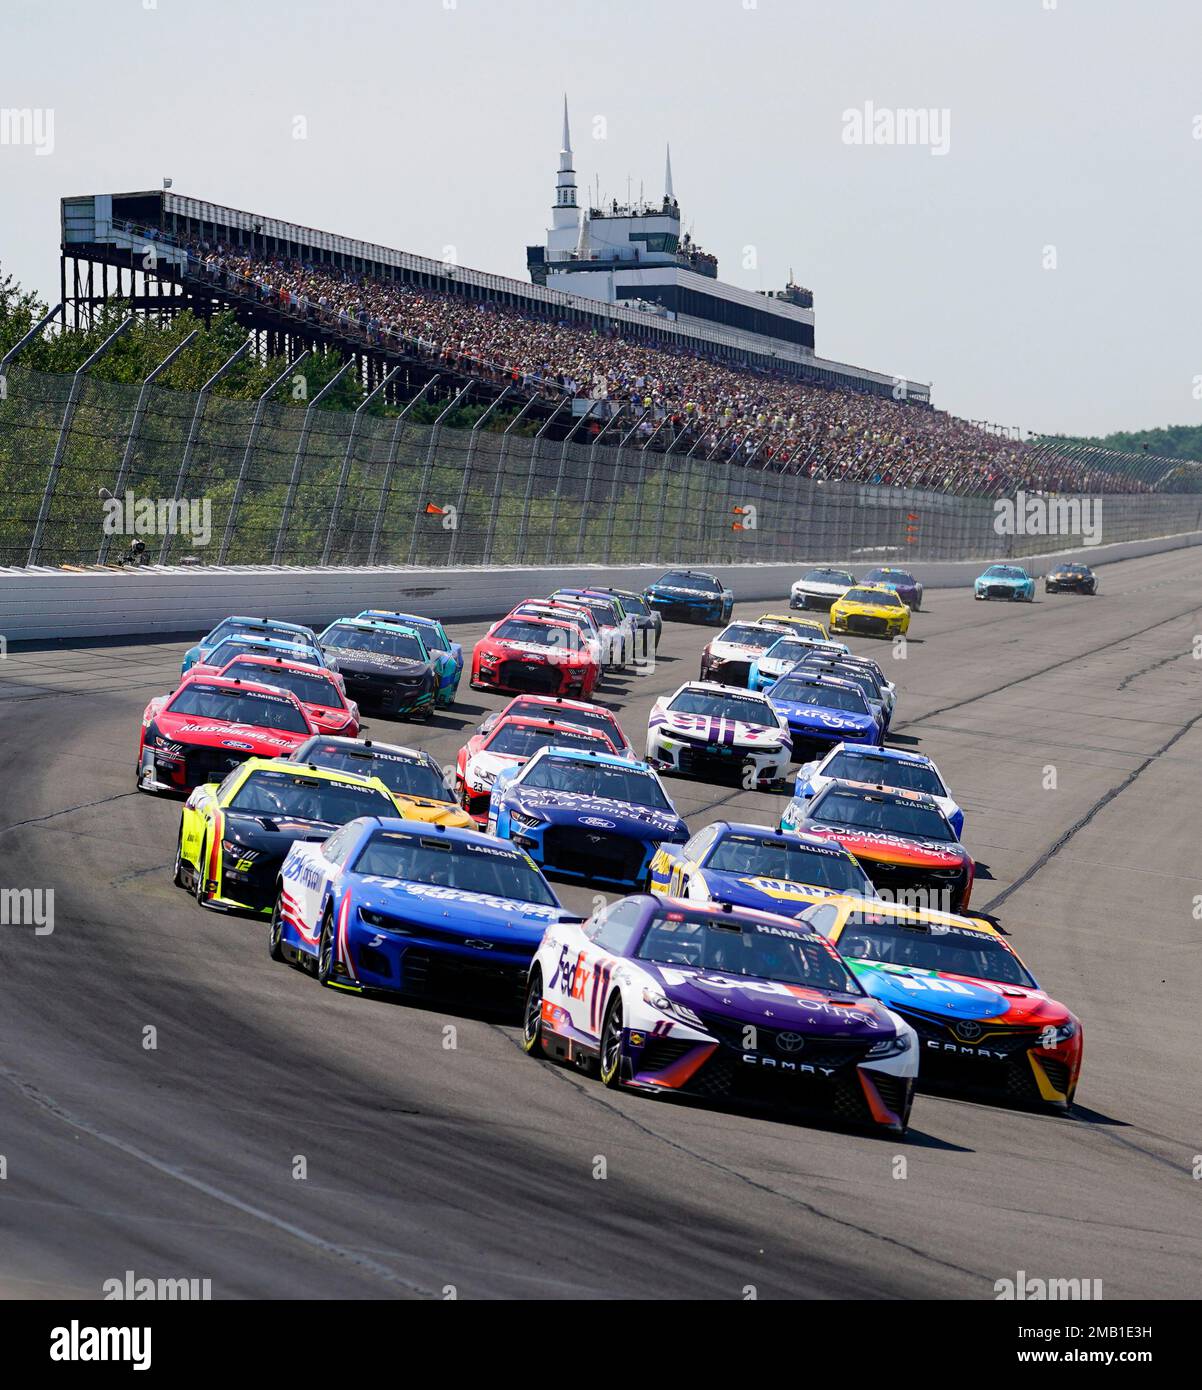 Denny Hamlin (11) leads the pack past the grandstand at the beginning of the NASCAR Cup